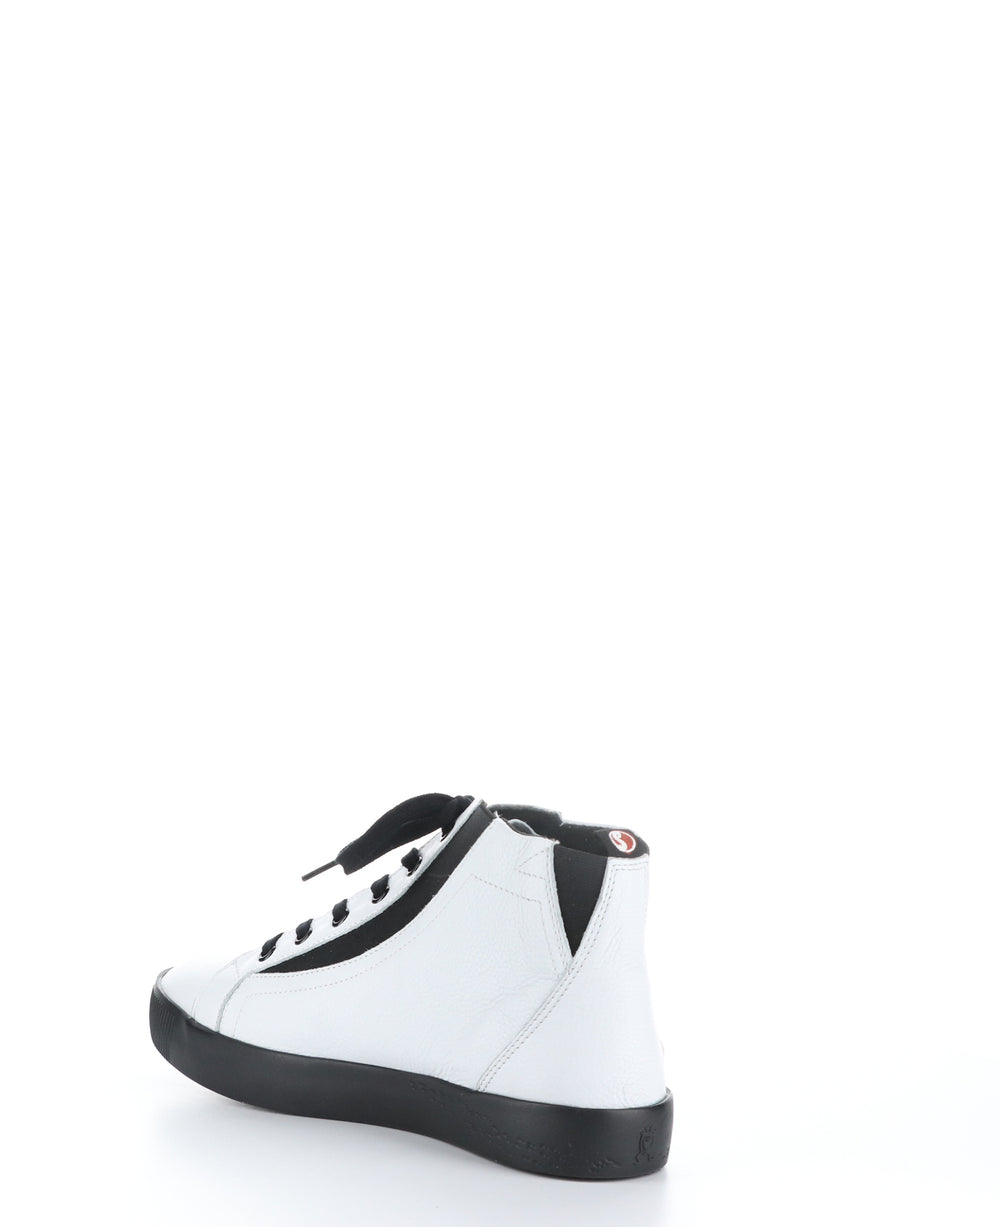 SHYL658SOF White Round Toe Shoes|SHYL658SOF Chaussures à Bout Rond in Blanc